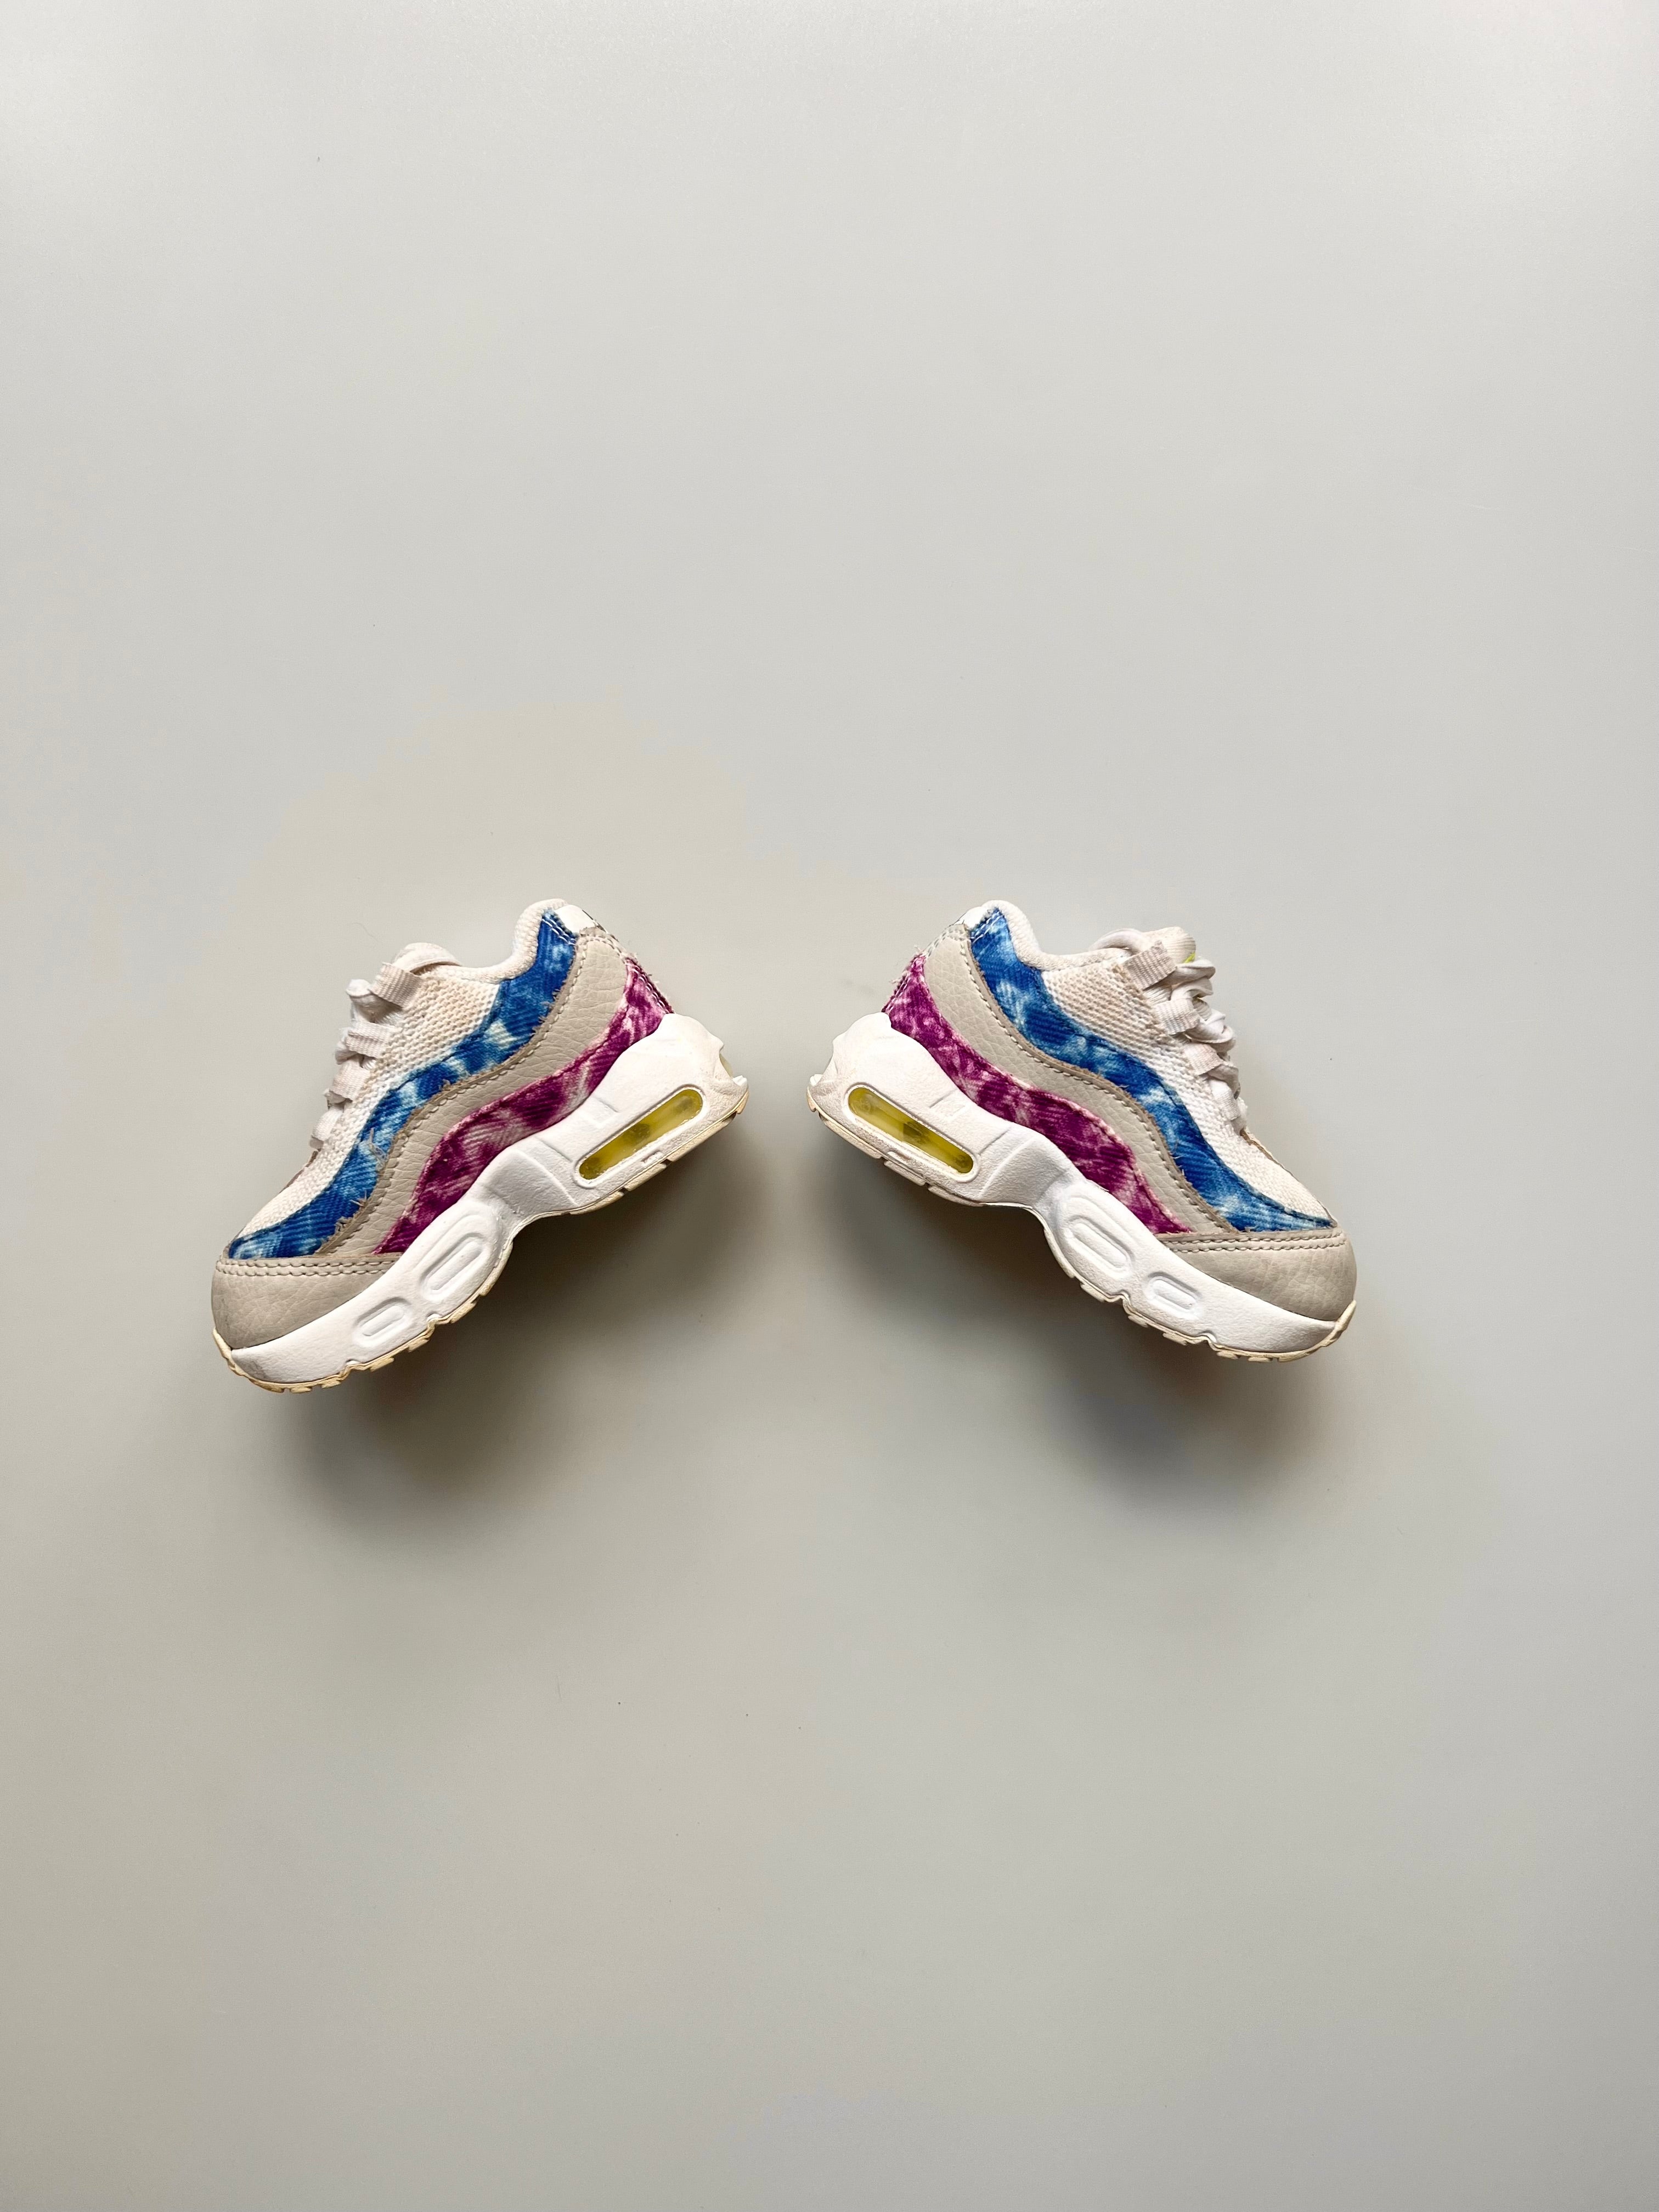 Nike Air Max 95 Tie-Dye Trainers Size 4.5